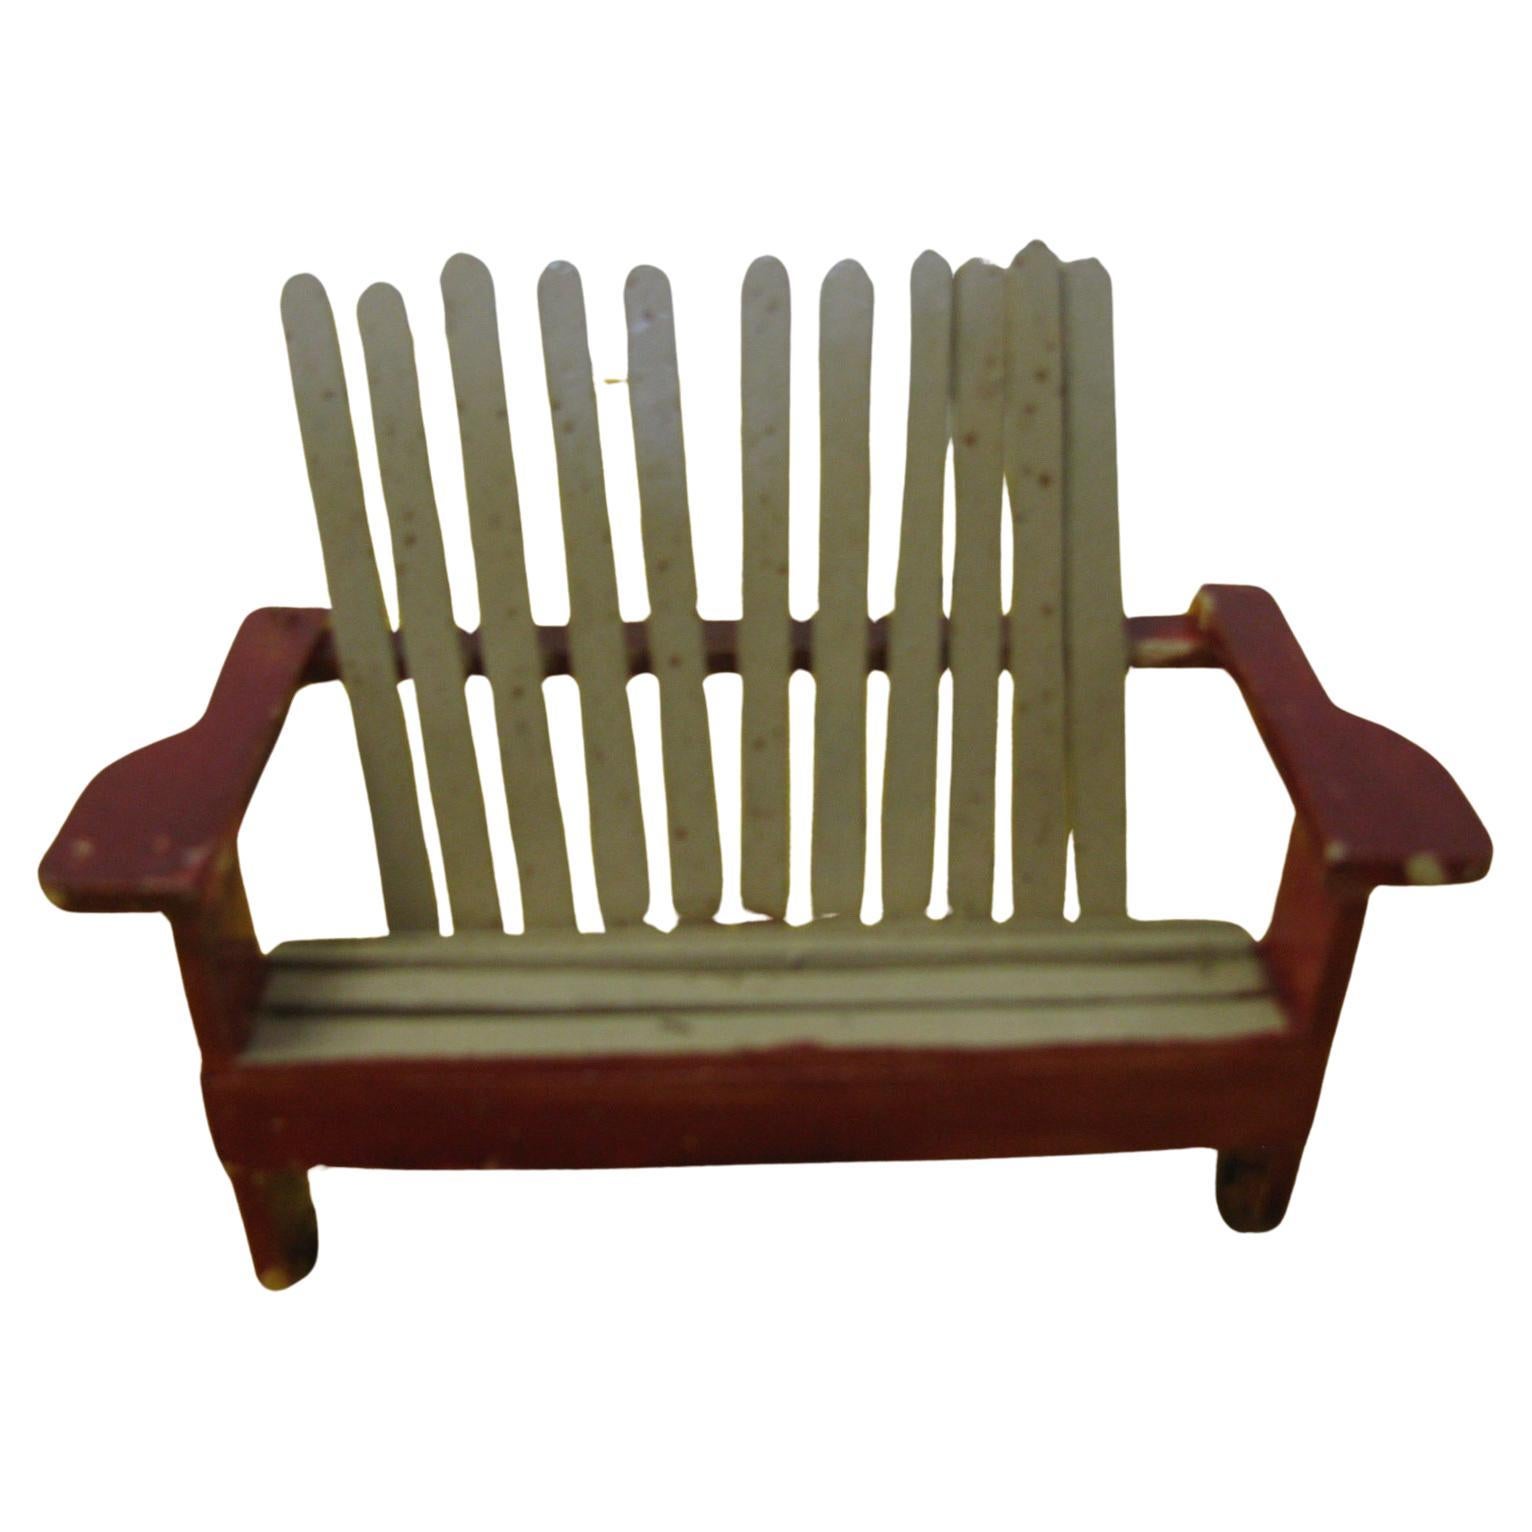 Wood Folk Art Adirondack Chairs with Table and Folding  Umbrella For Sale